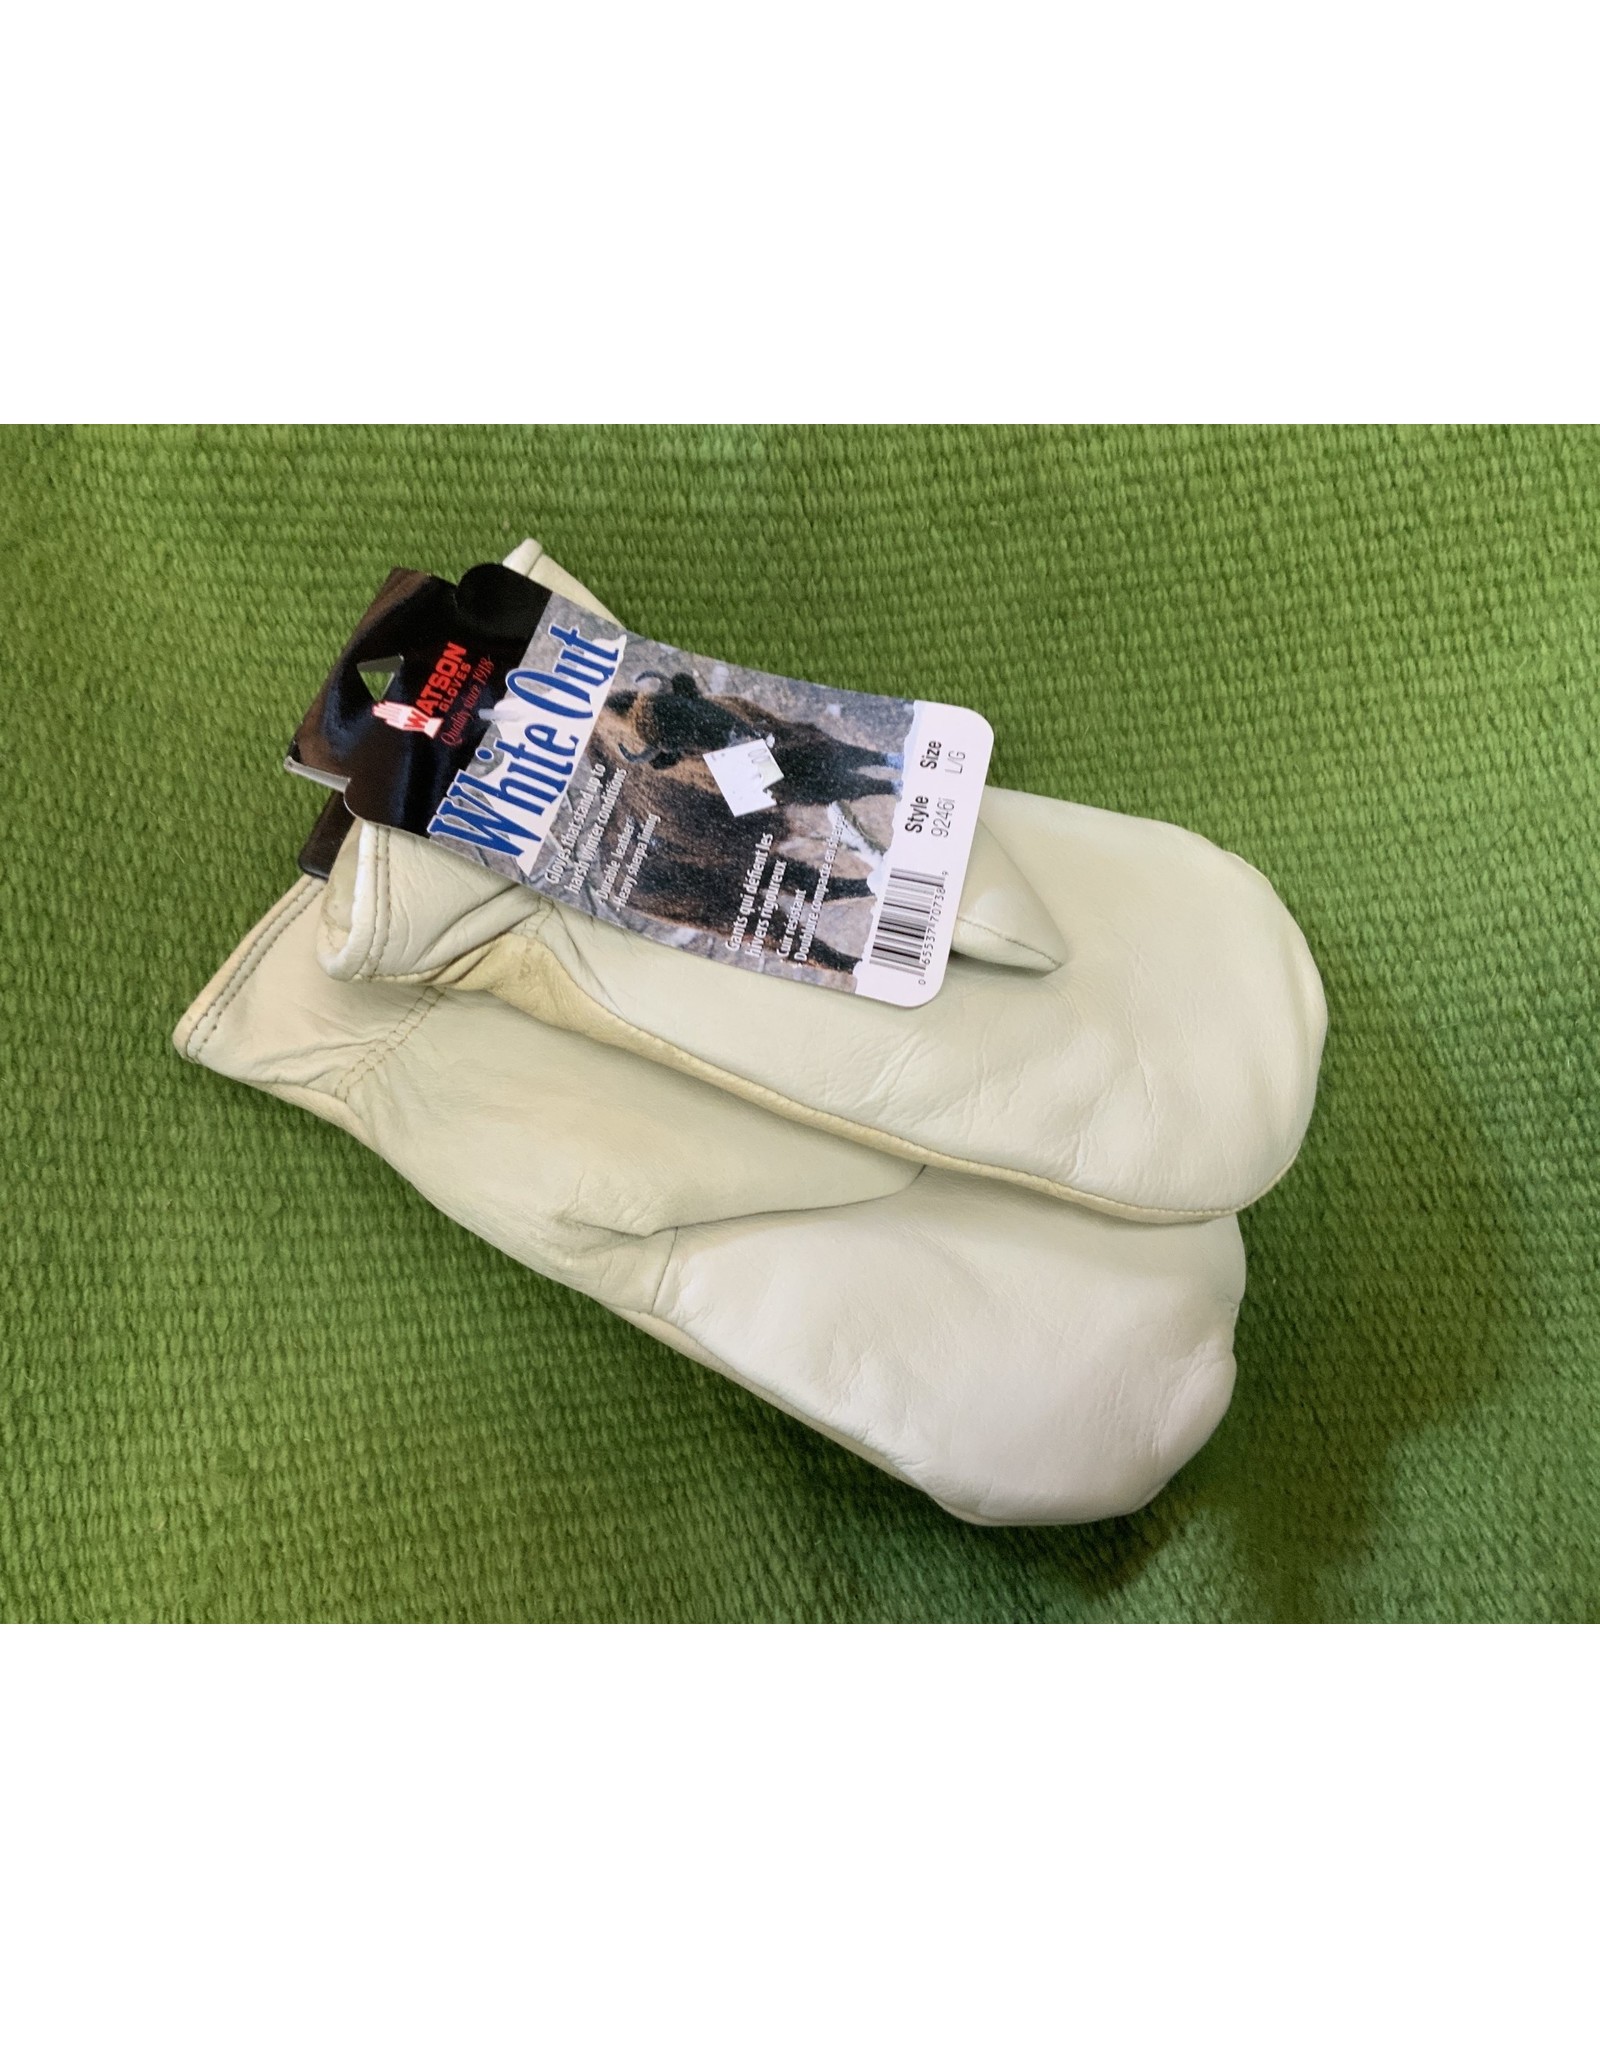 Watson Gloves Gloves* White out-L 92461